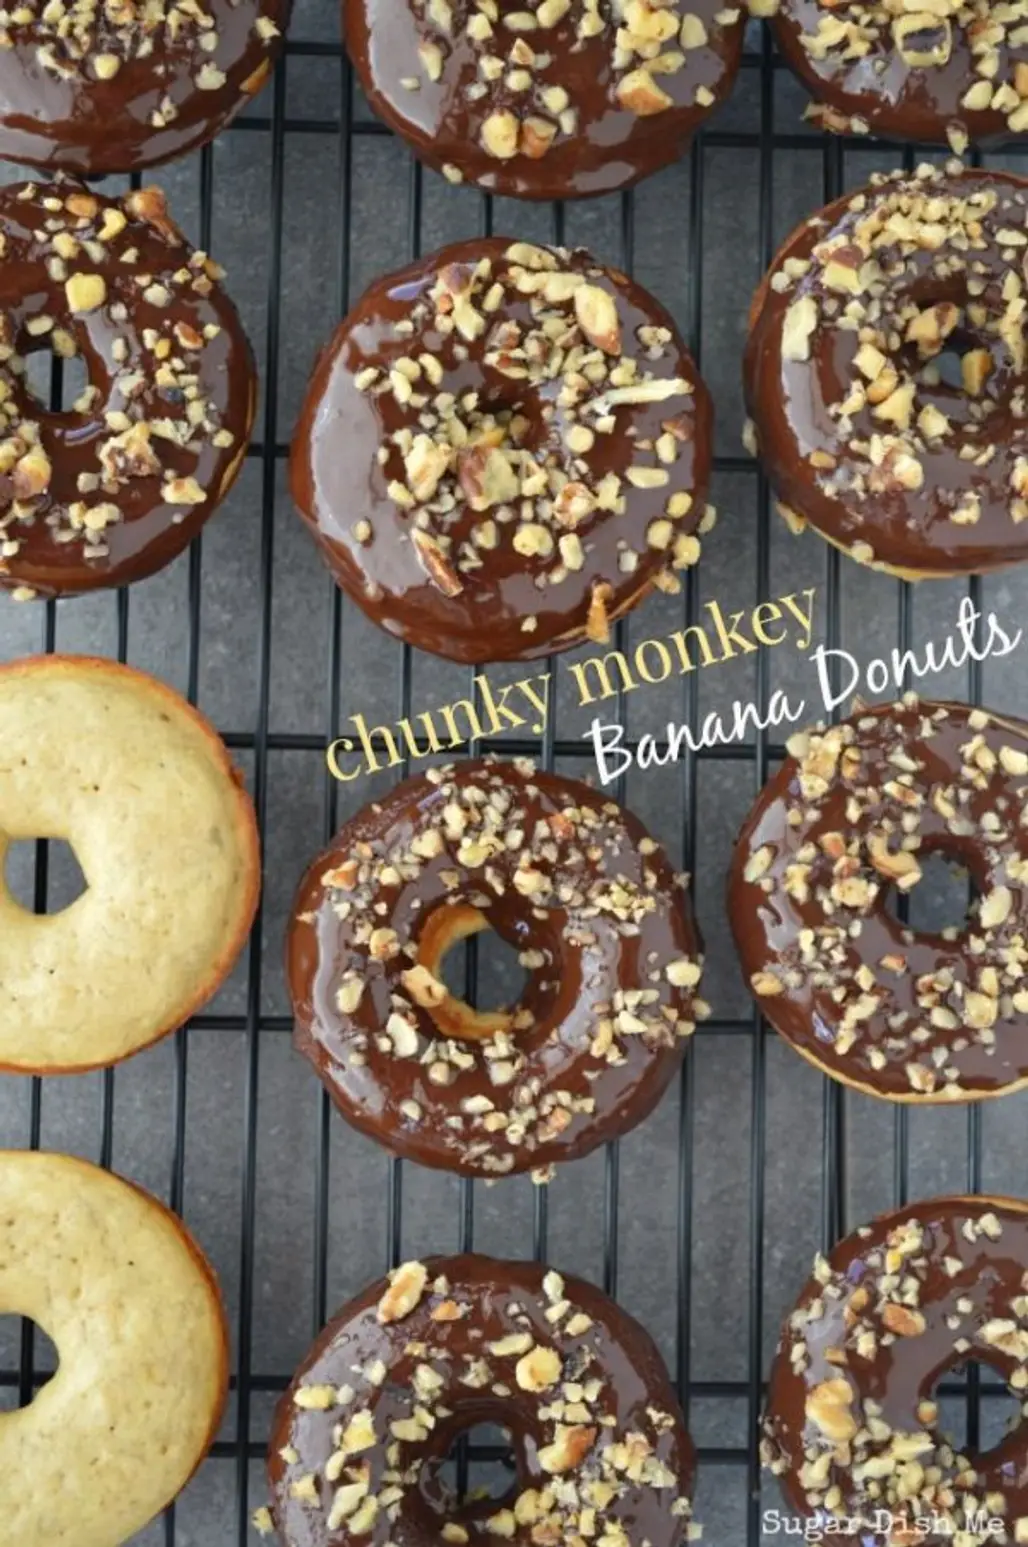 Baked Banana Donuts Dipped in Dark Chocolate and Sprinkled with Walnuts